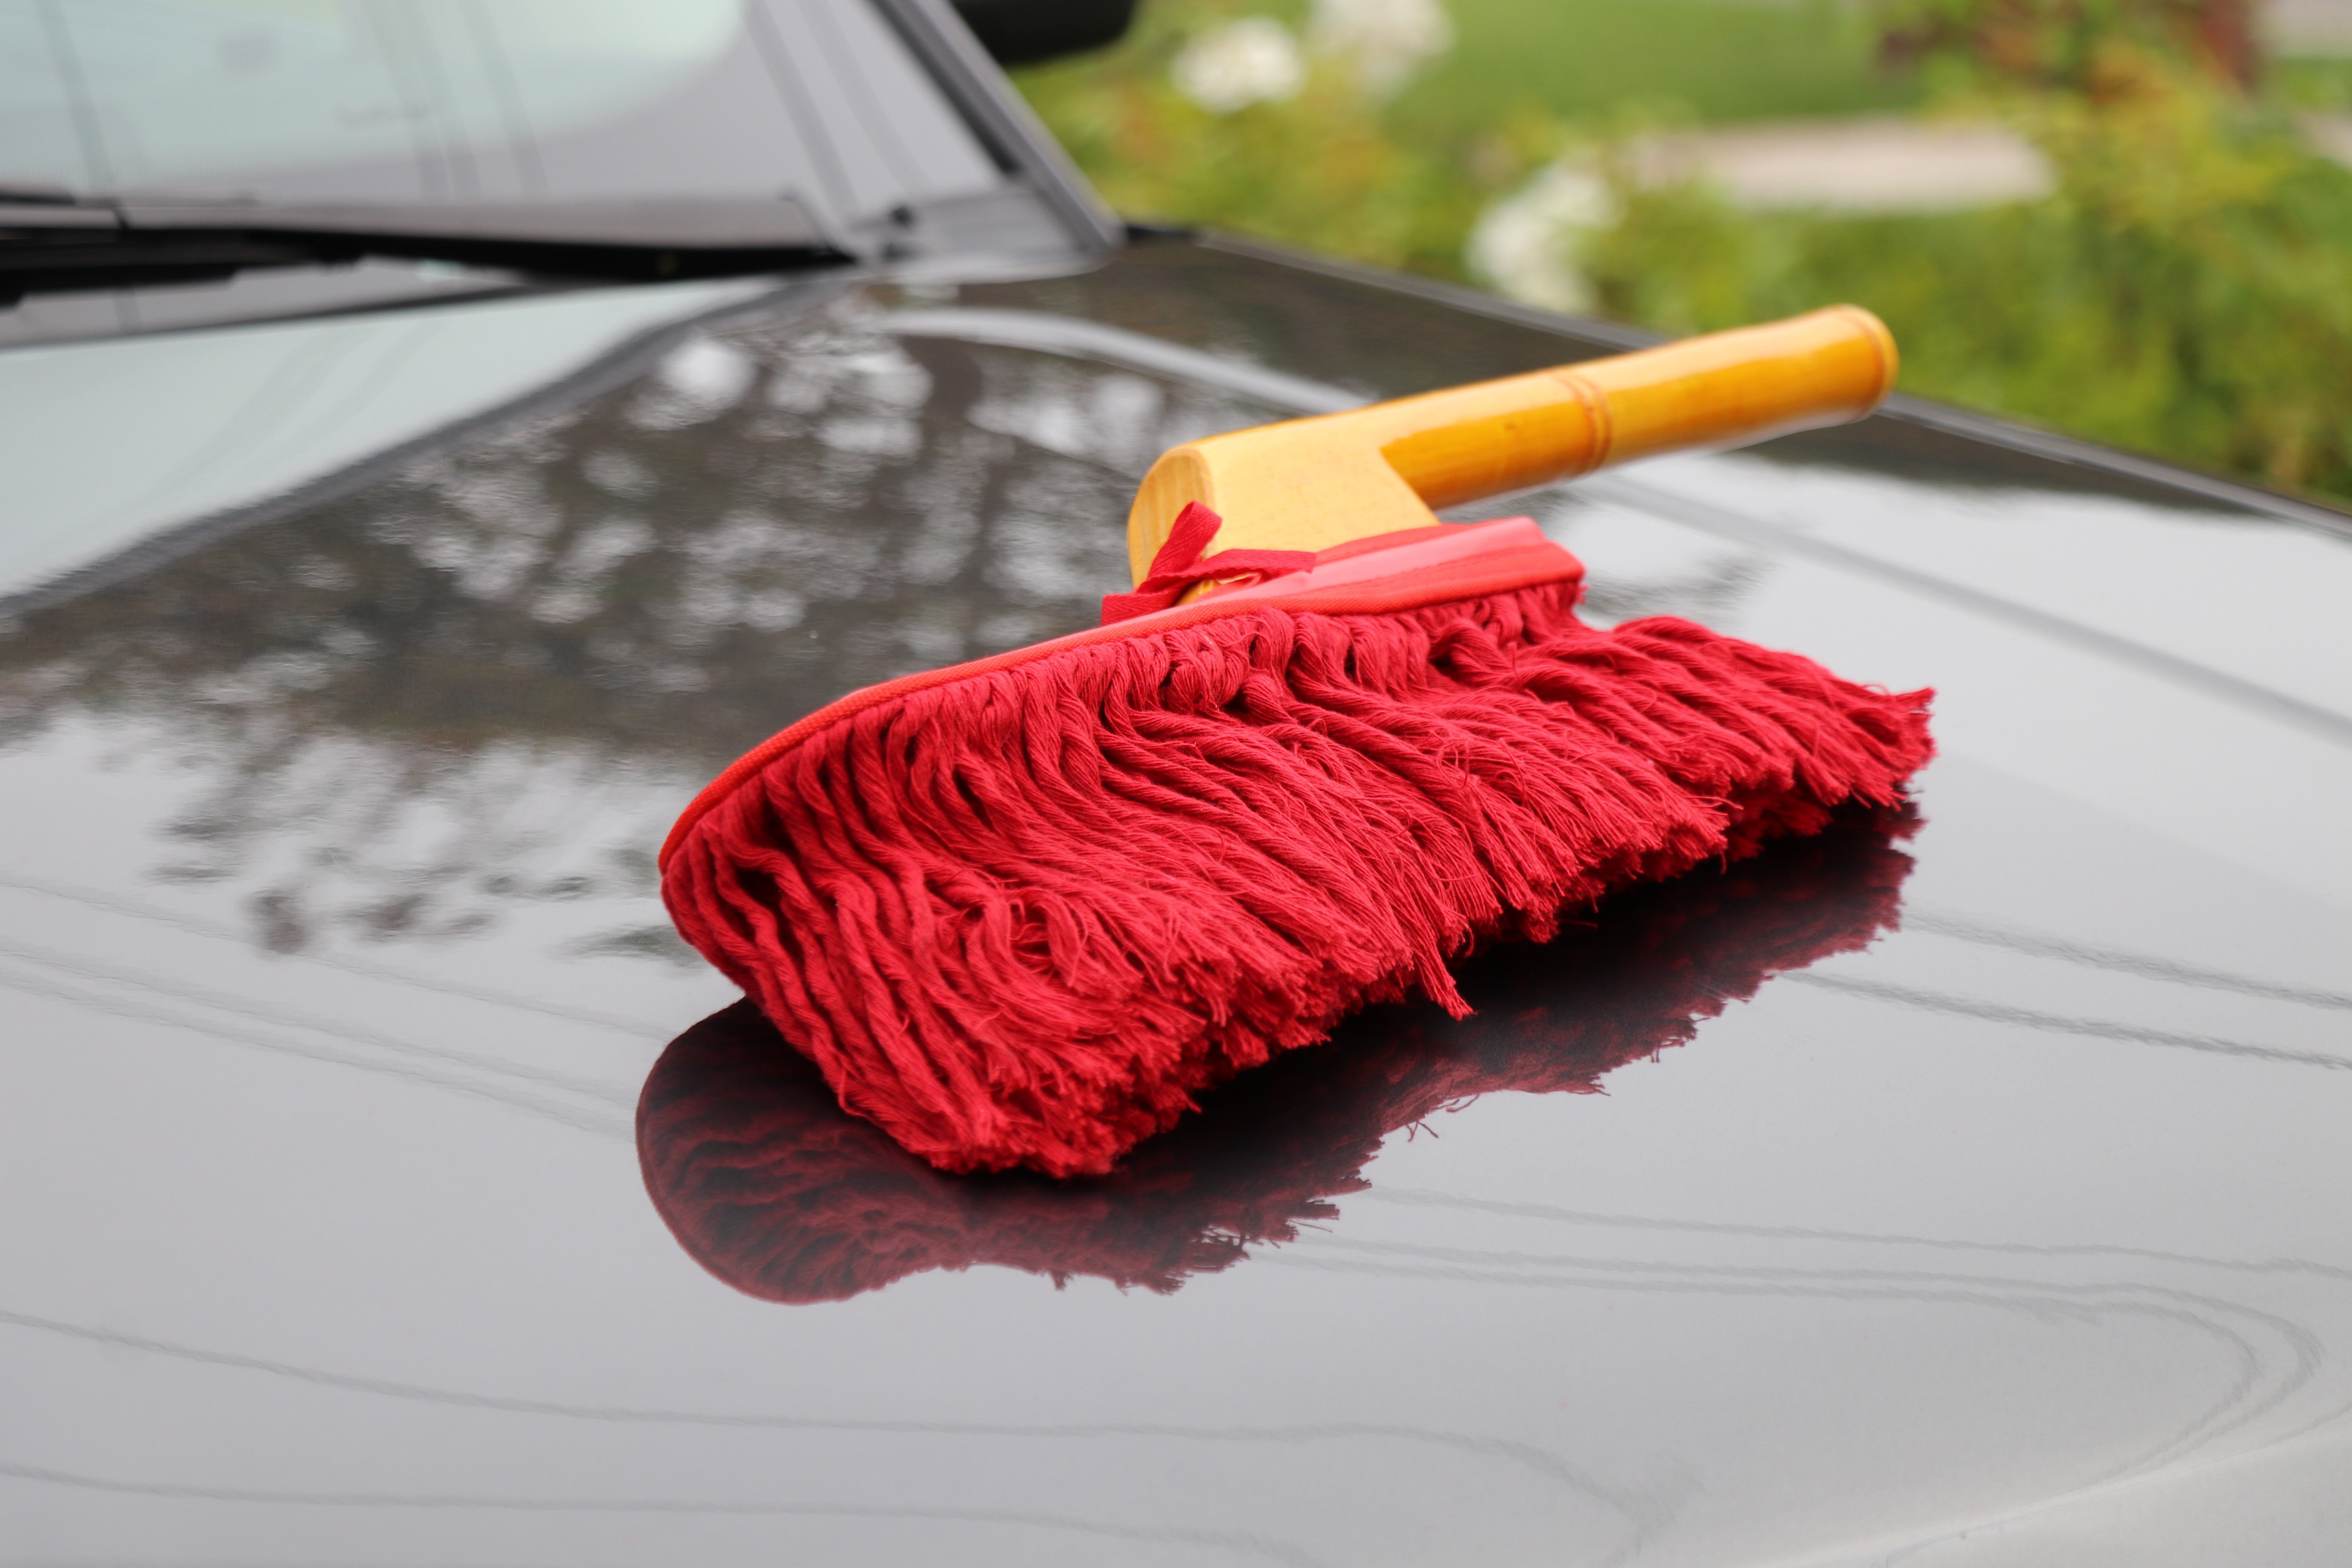 CALIFORNIA CAR DUSTER - ORIGINAL STYLE with WOODEN HANDLE - Griffs